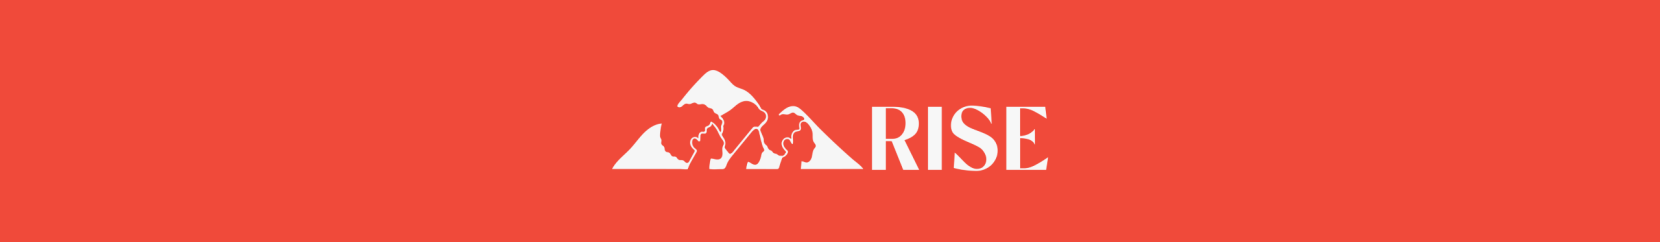 RISE Project Logo featuring the silhouettes of three women facing right